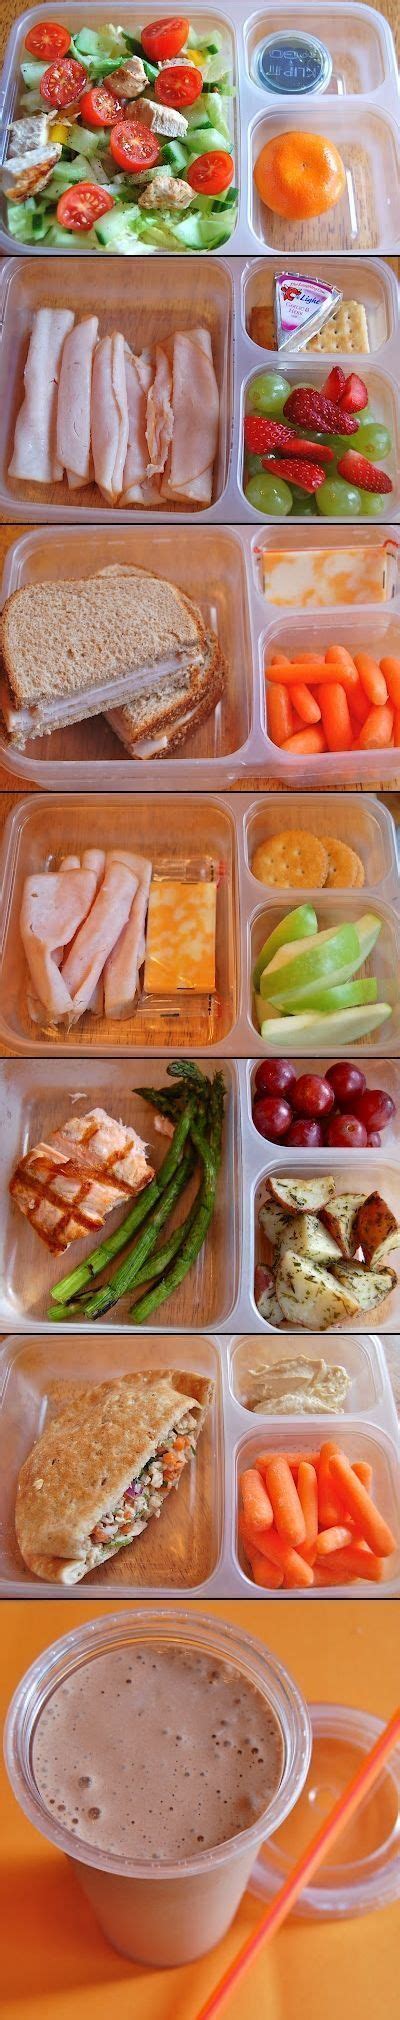 Healthy Brown Bag Lunch Ideas For Kids Adults And